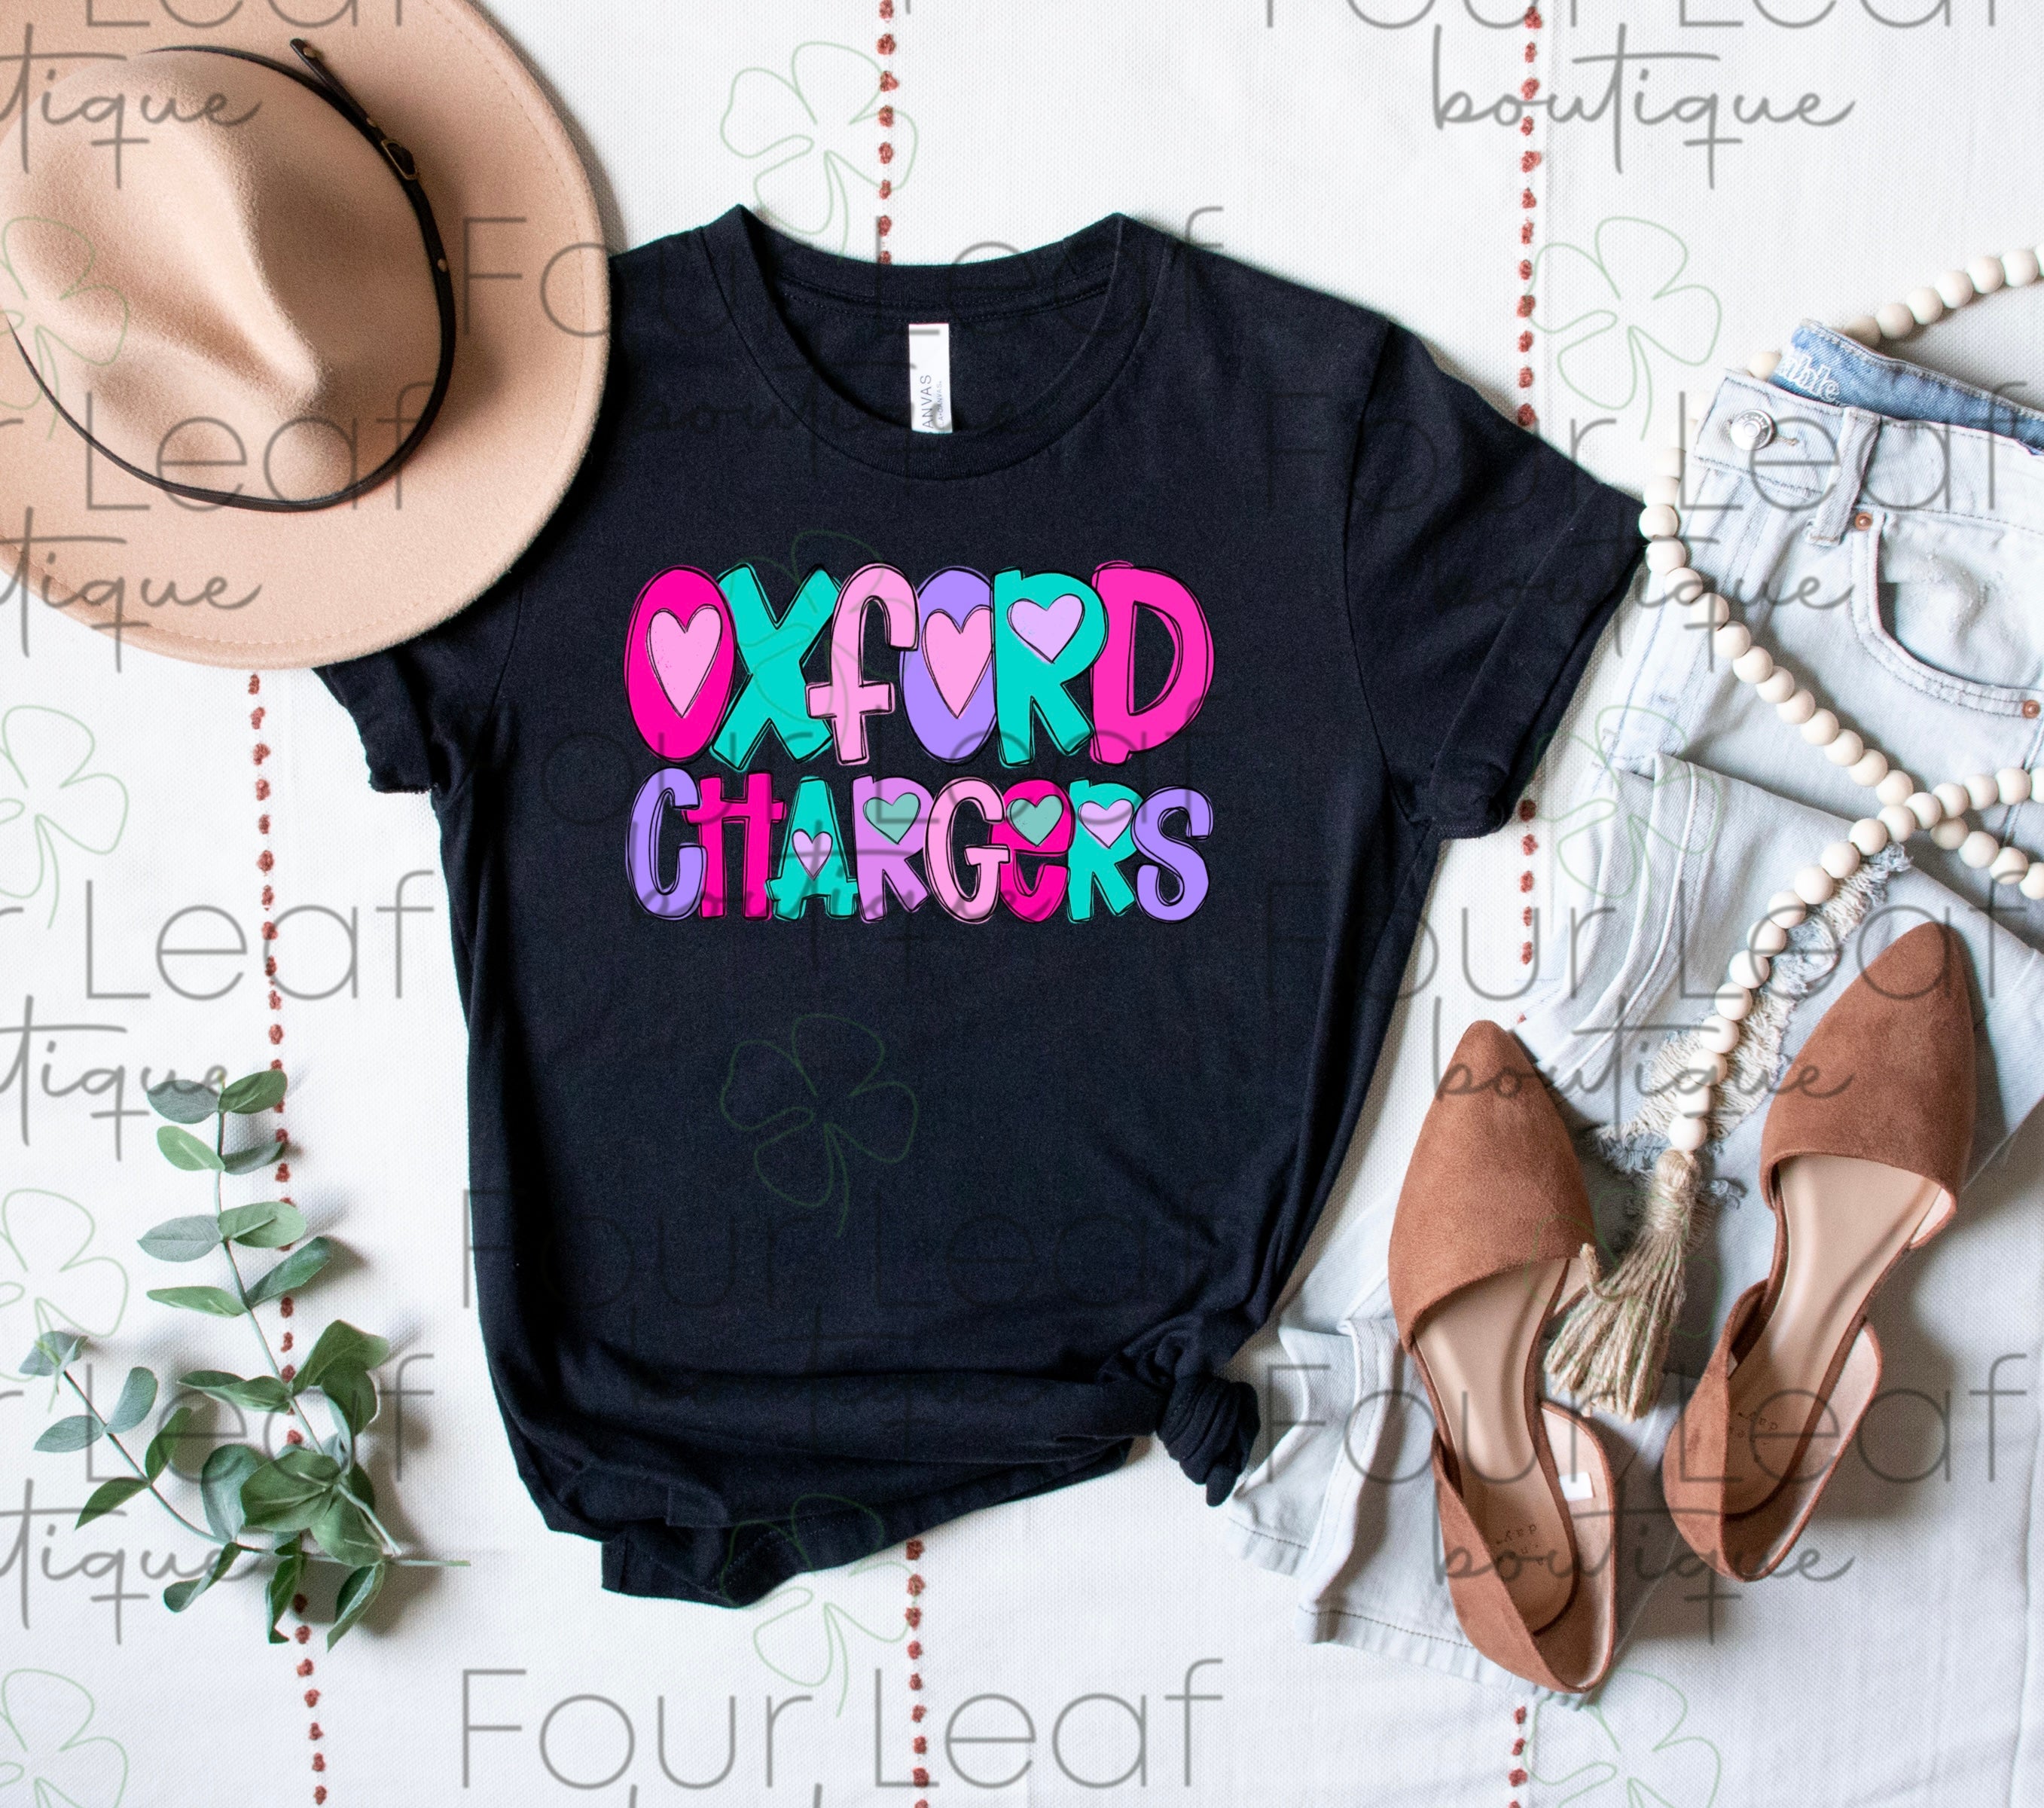 Chargers- YOUTH sizes